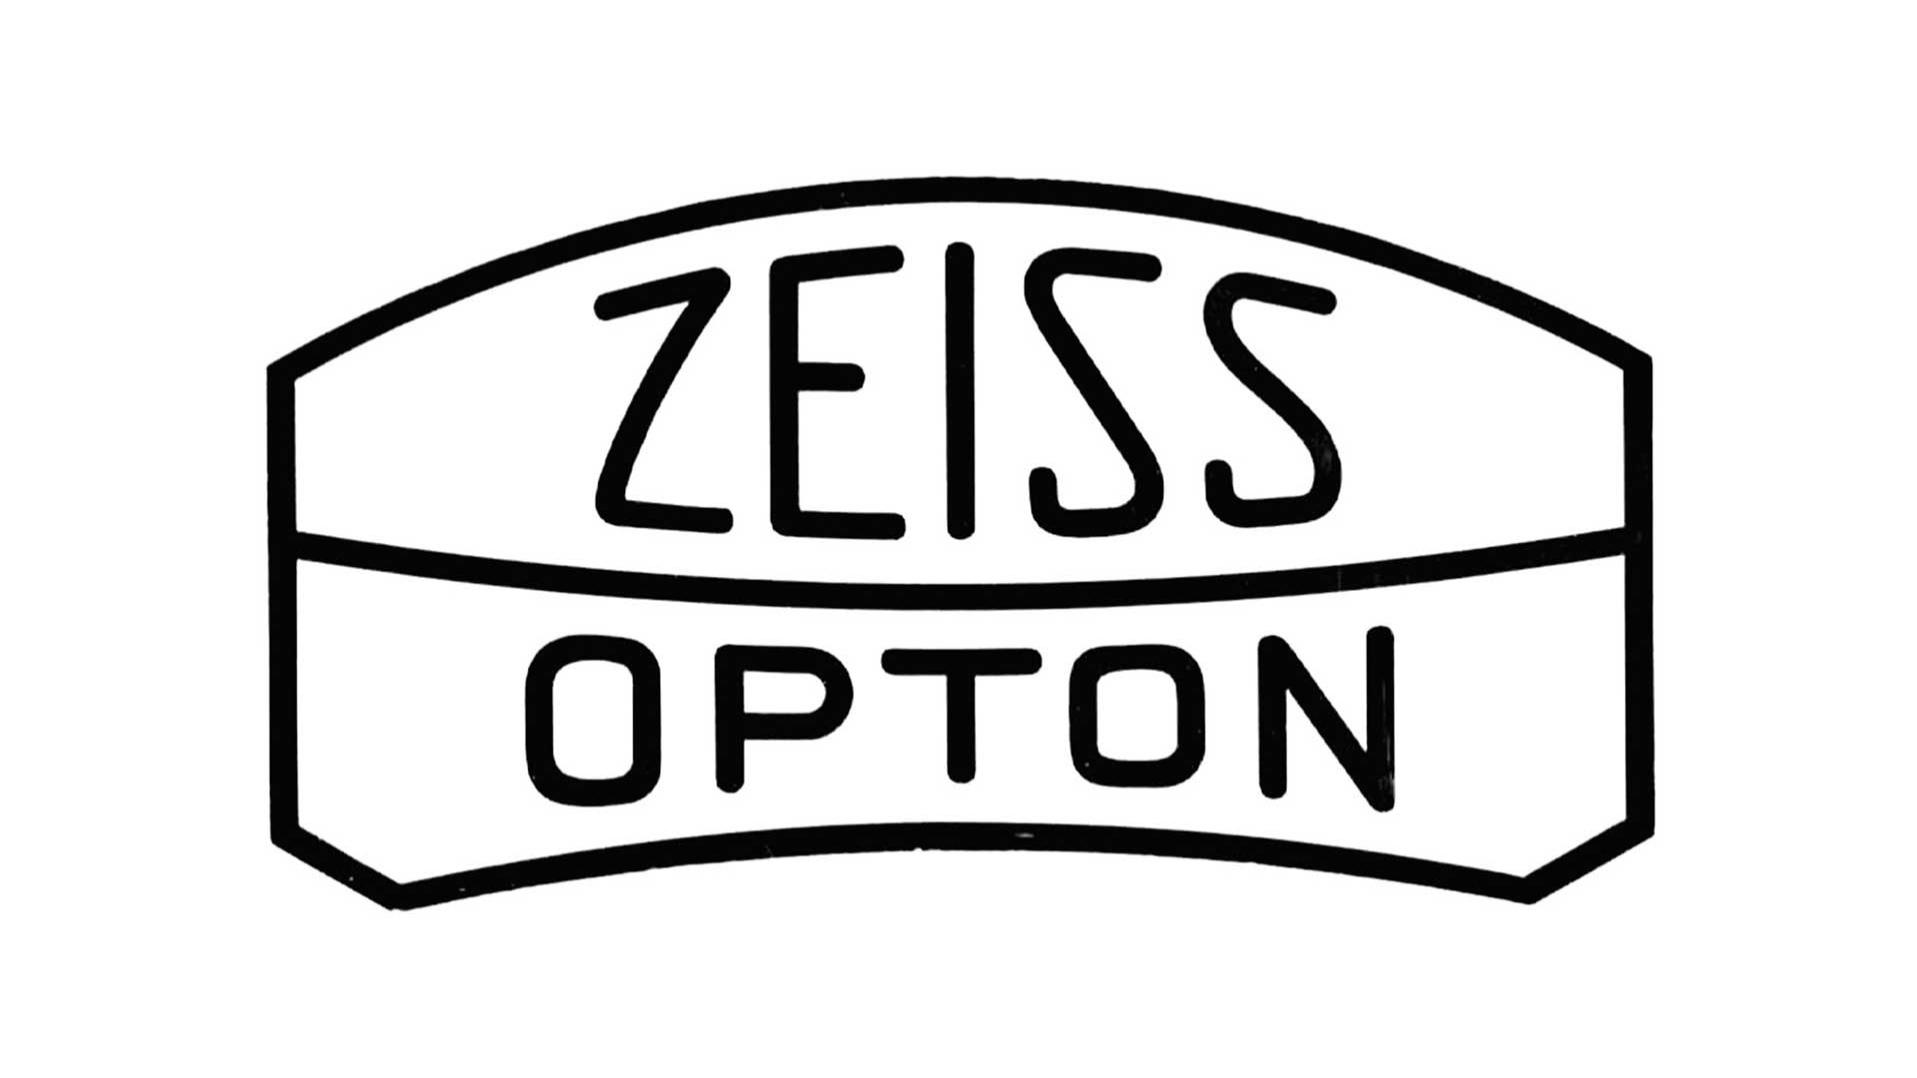 The lens with ZEISS OPTON